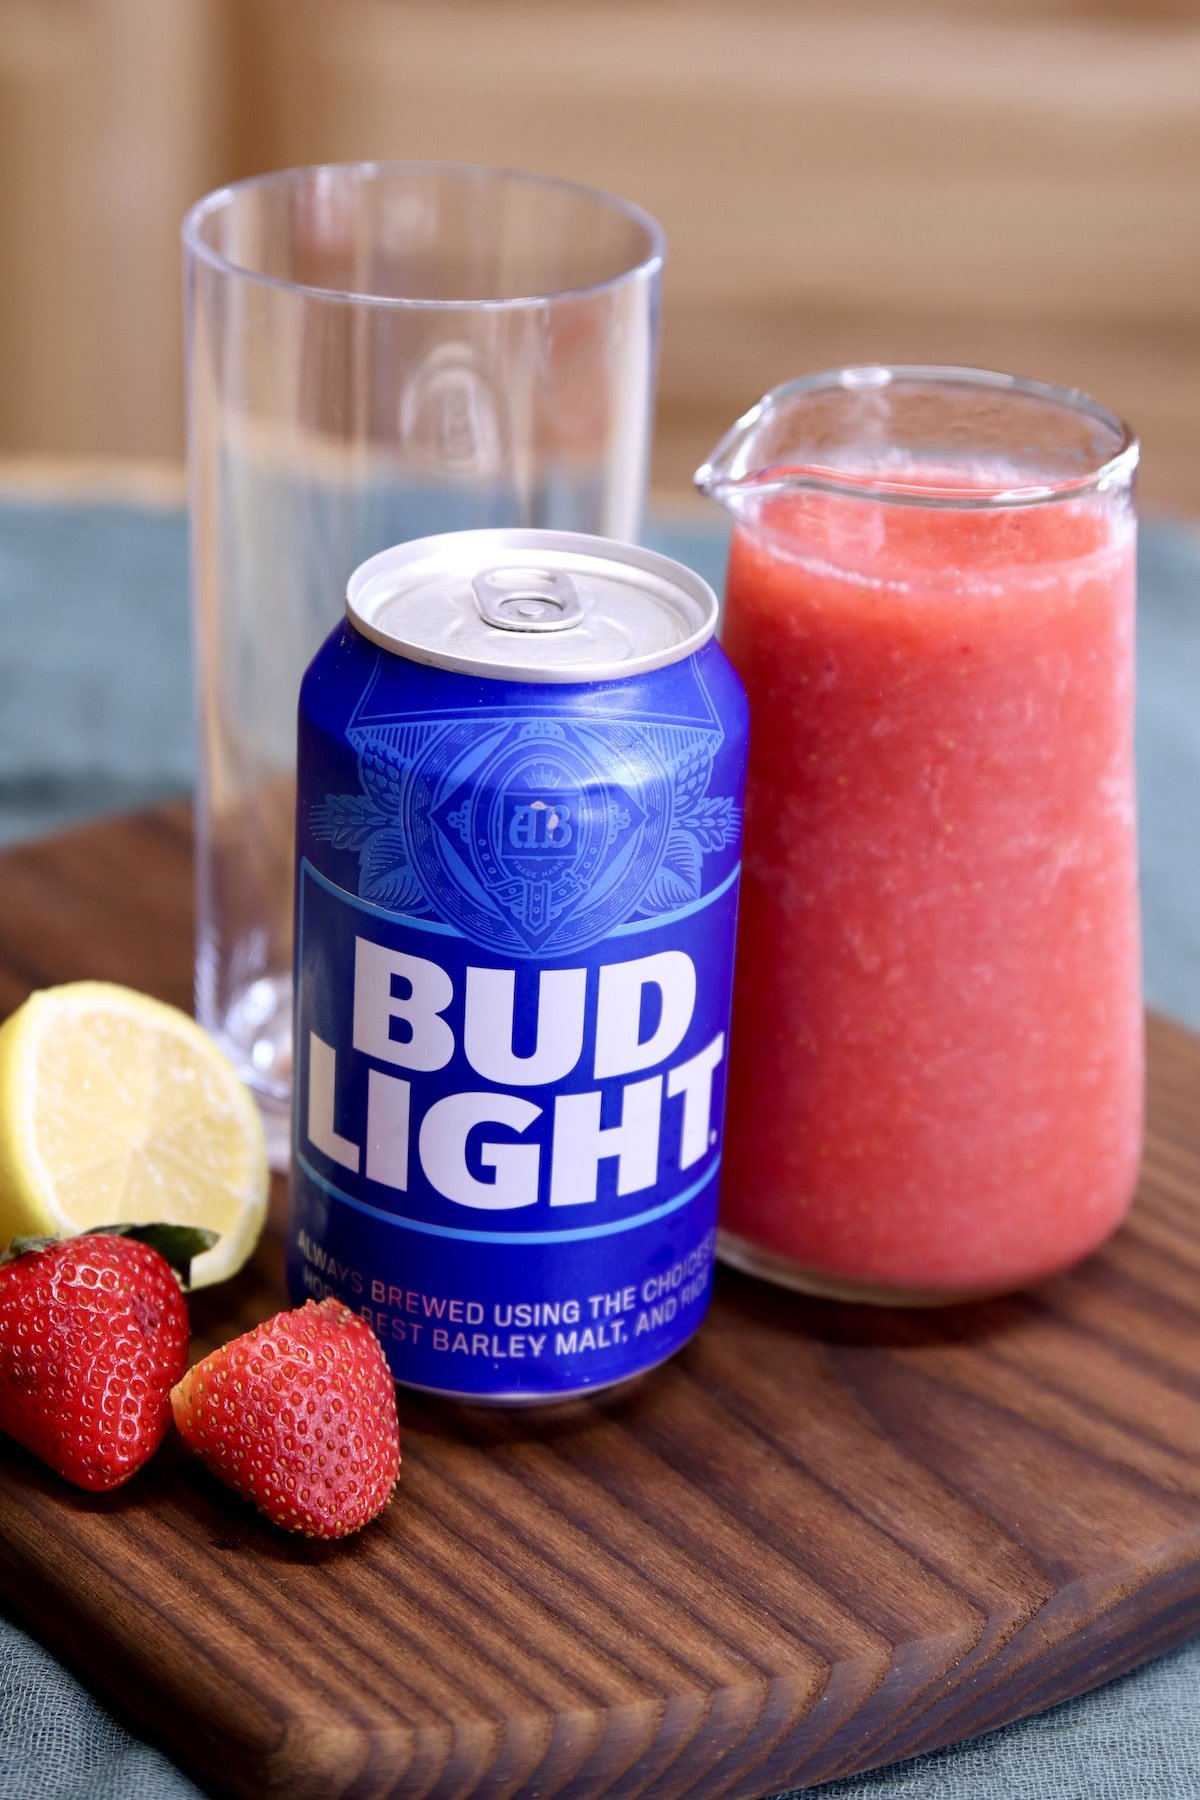 bud light beer can with jar of strawberry vodka cocktail mixture.